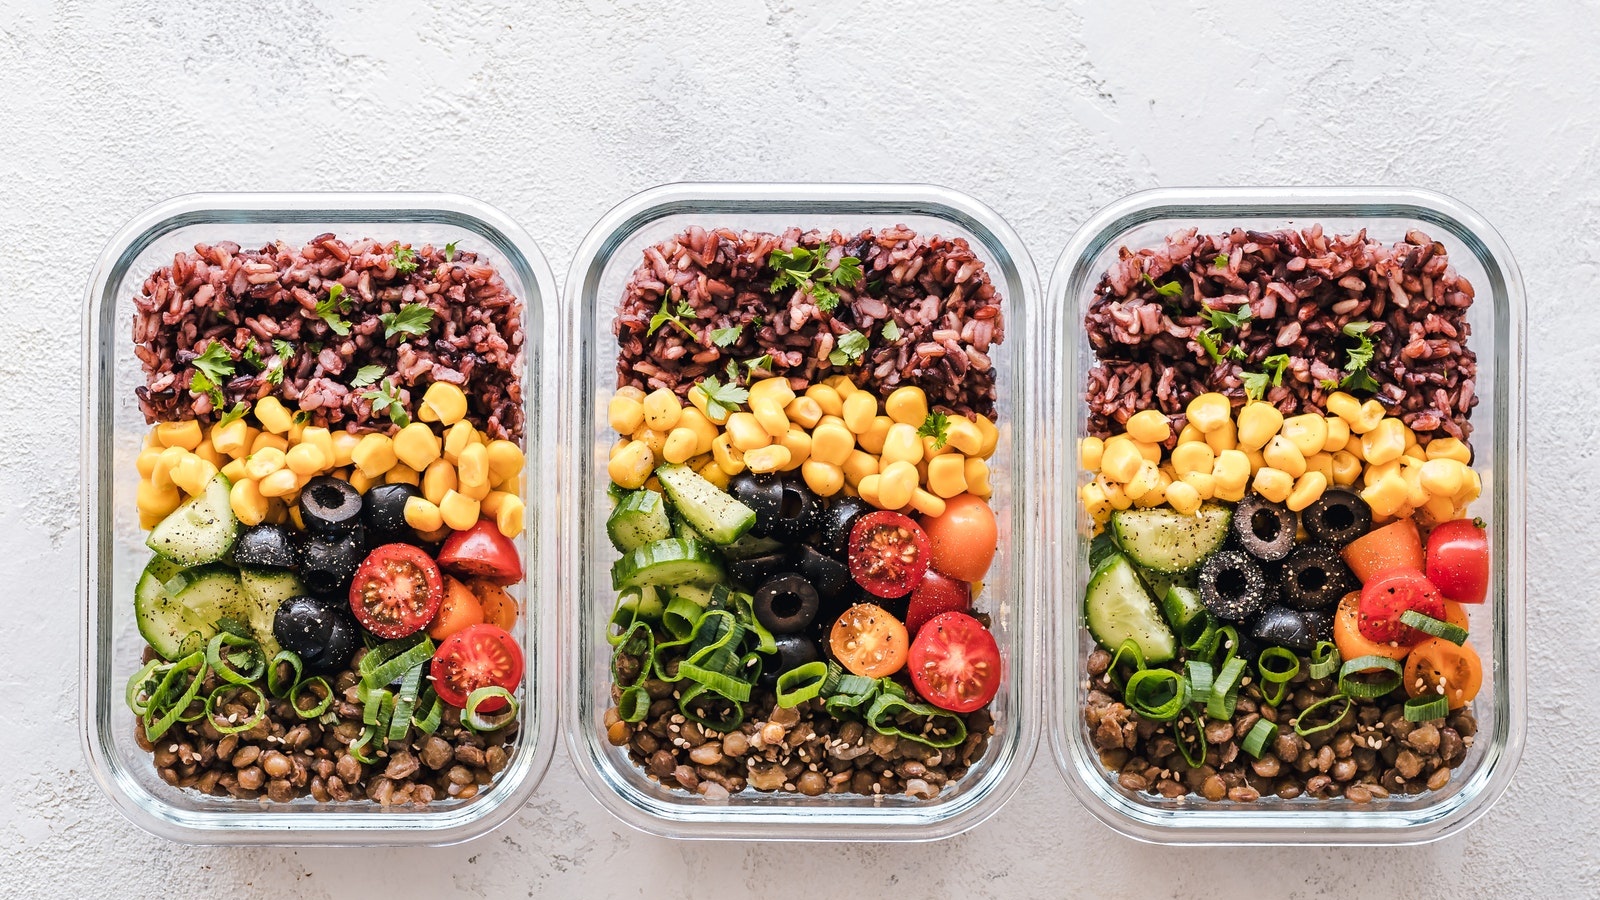 Set Yourself up for Success with These Healthy Meal Prep Hacks